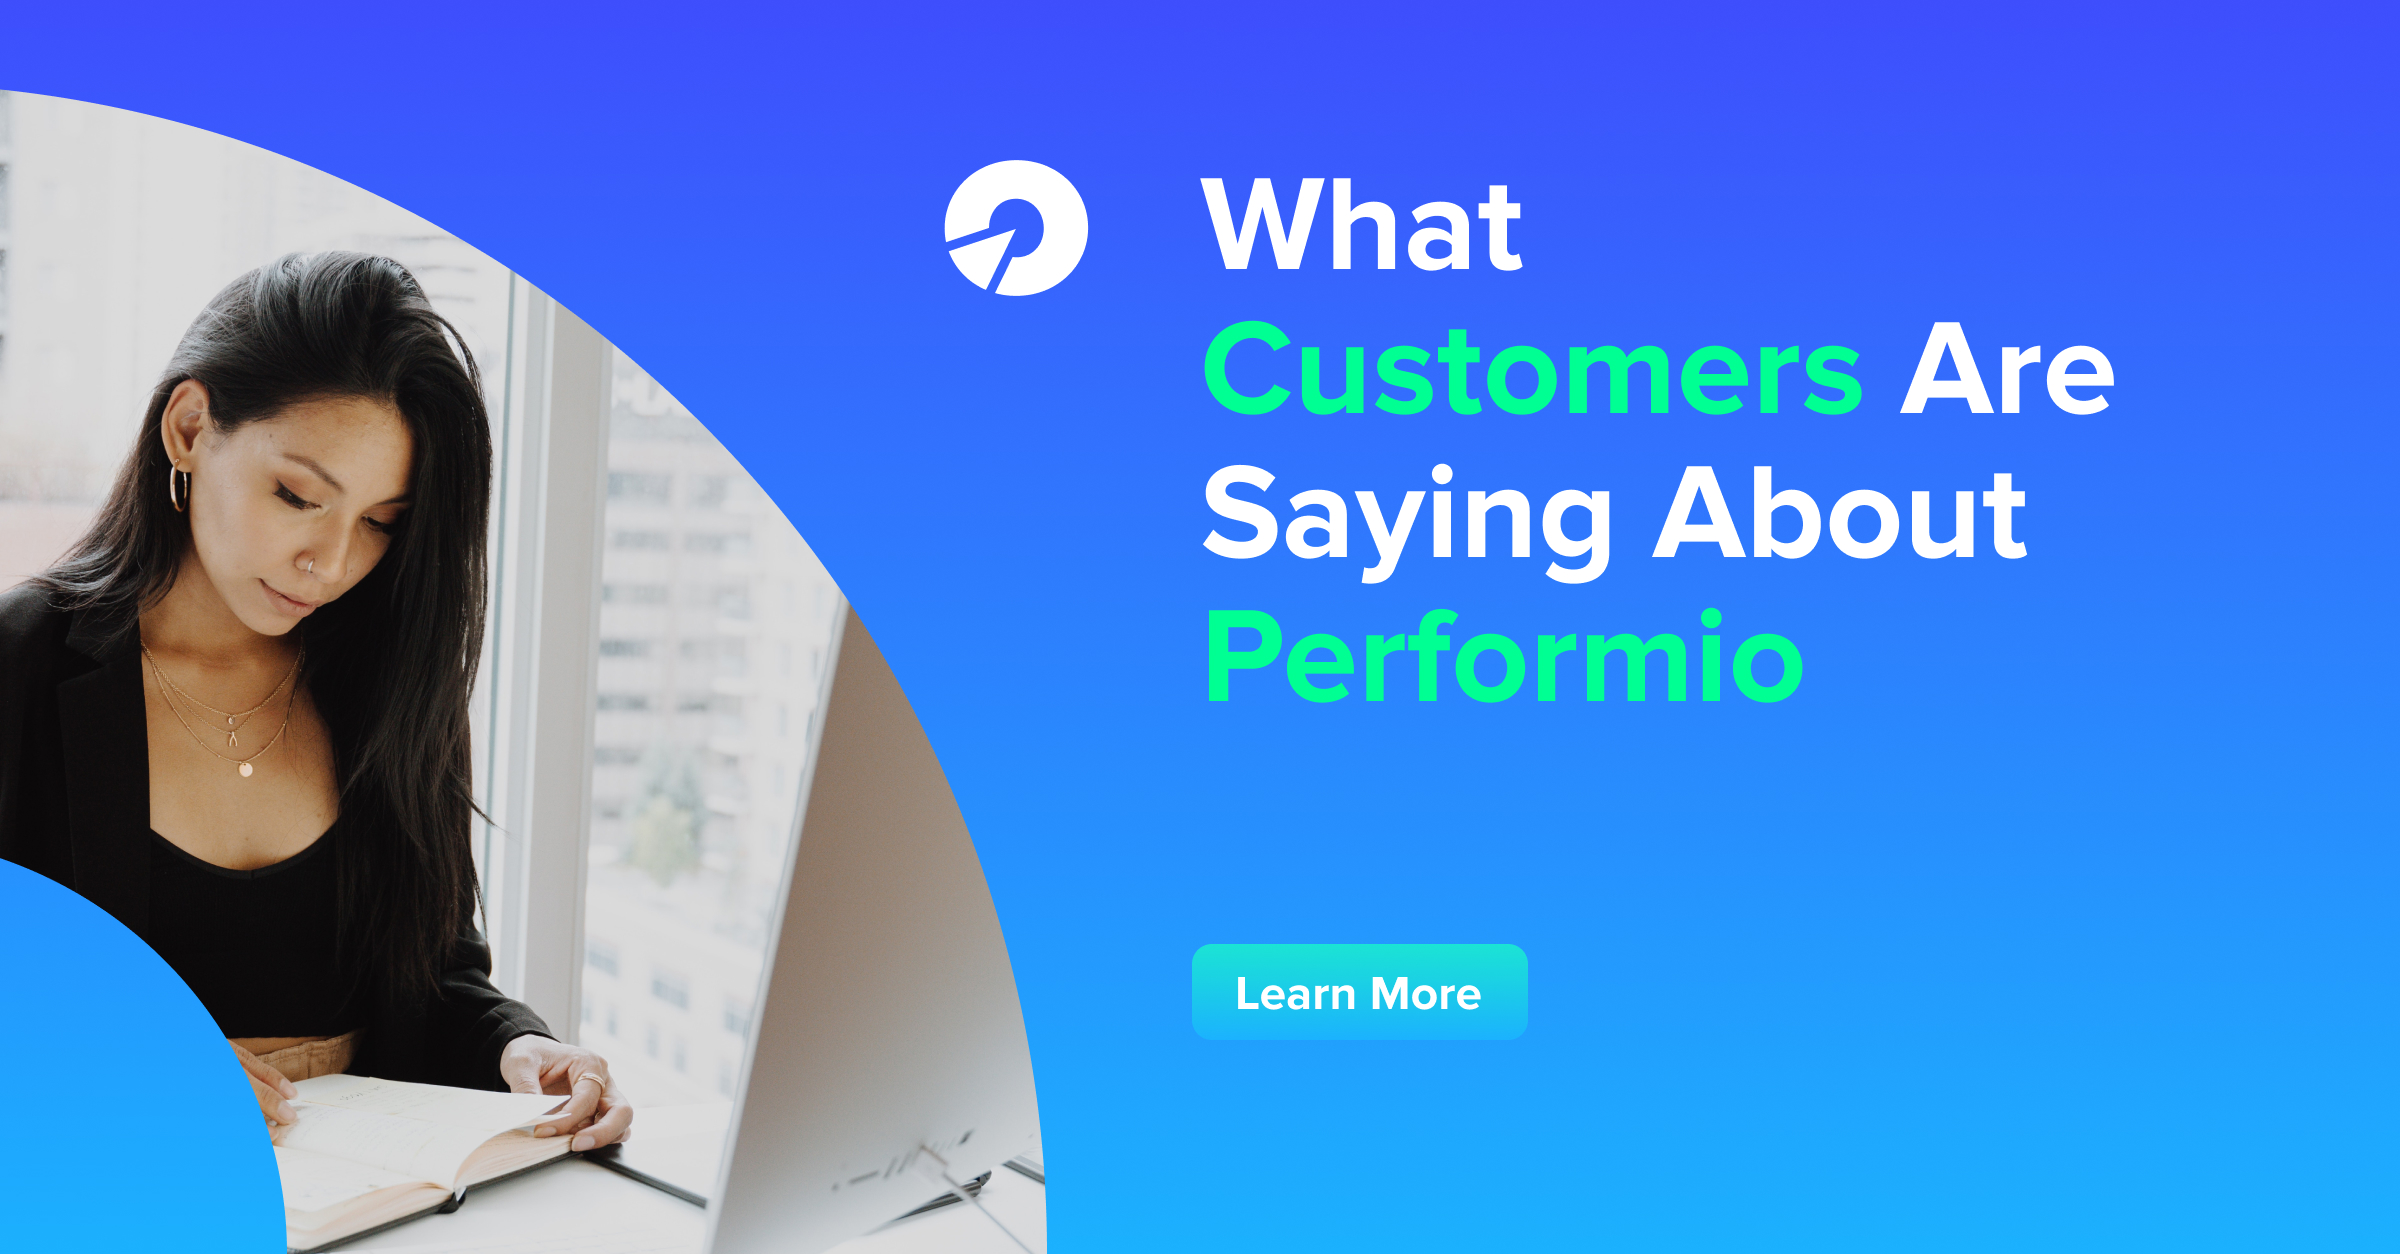 What Customers Are Saying About Performio